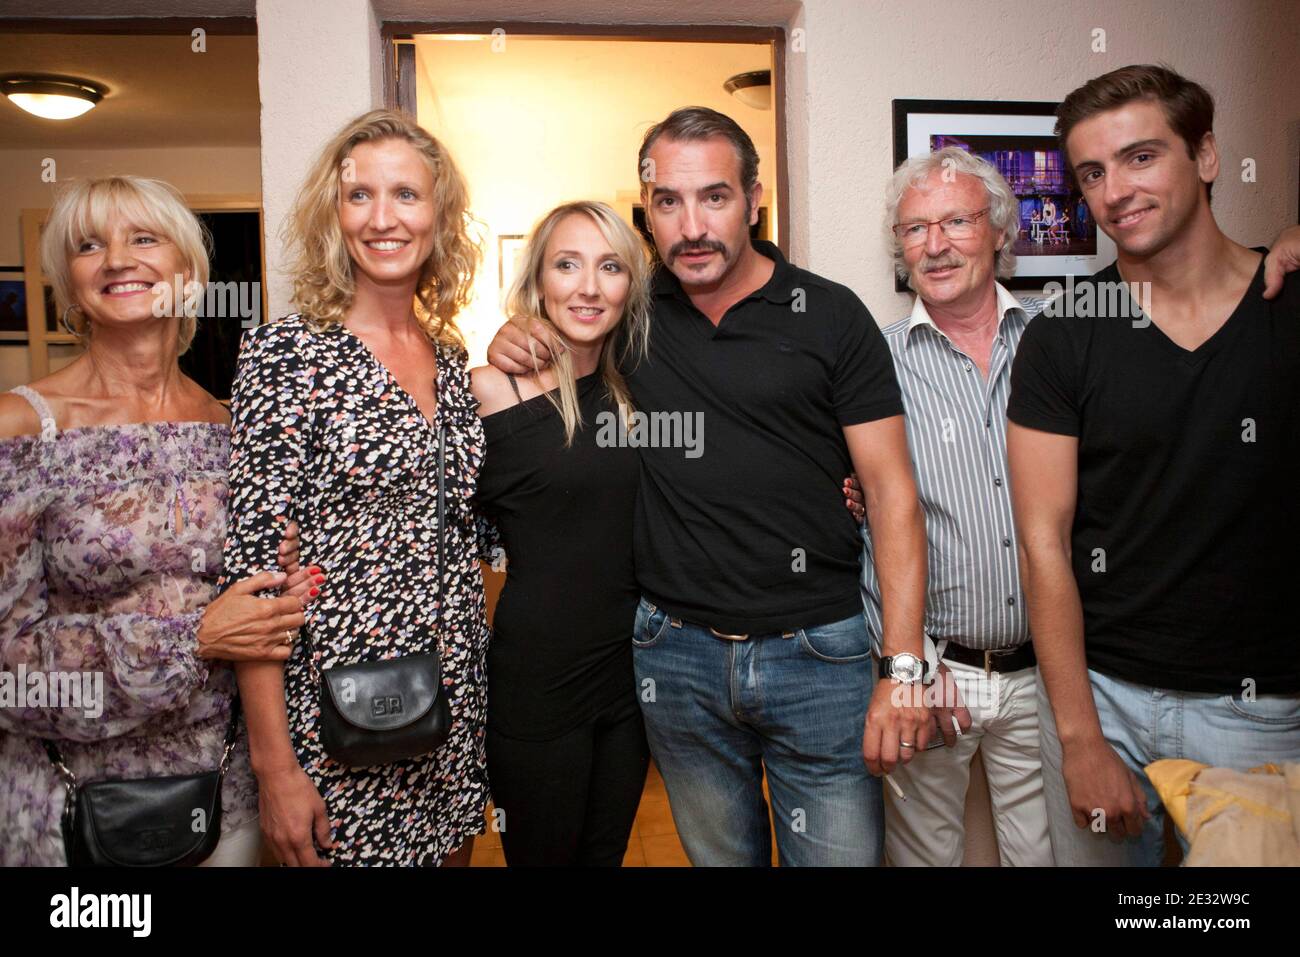 Audrey Lamy with family including sister Alexandra Lamy and Jean Dujardin  pose during Humoristic gala animated by Michel Boujenah during Festival of  Ramatuelle 2010 in Ramatuelle, France, on July 31, 2010. Photo